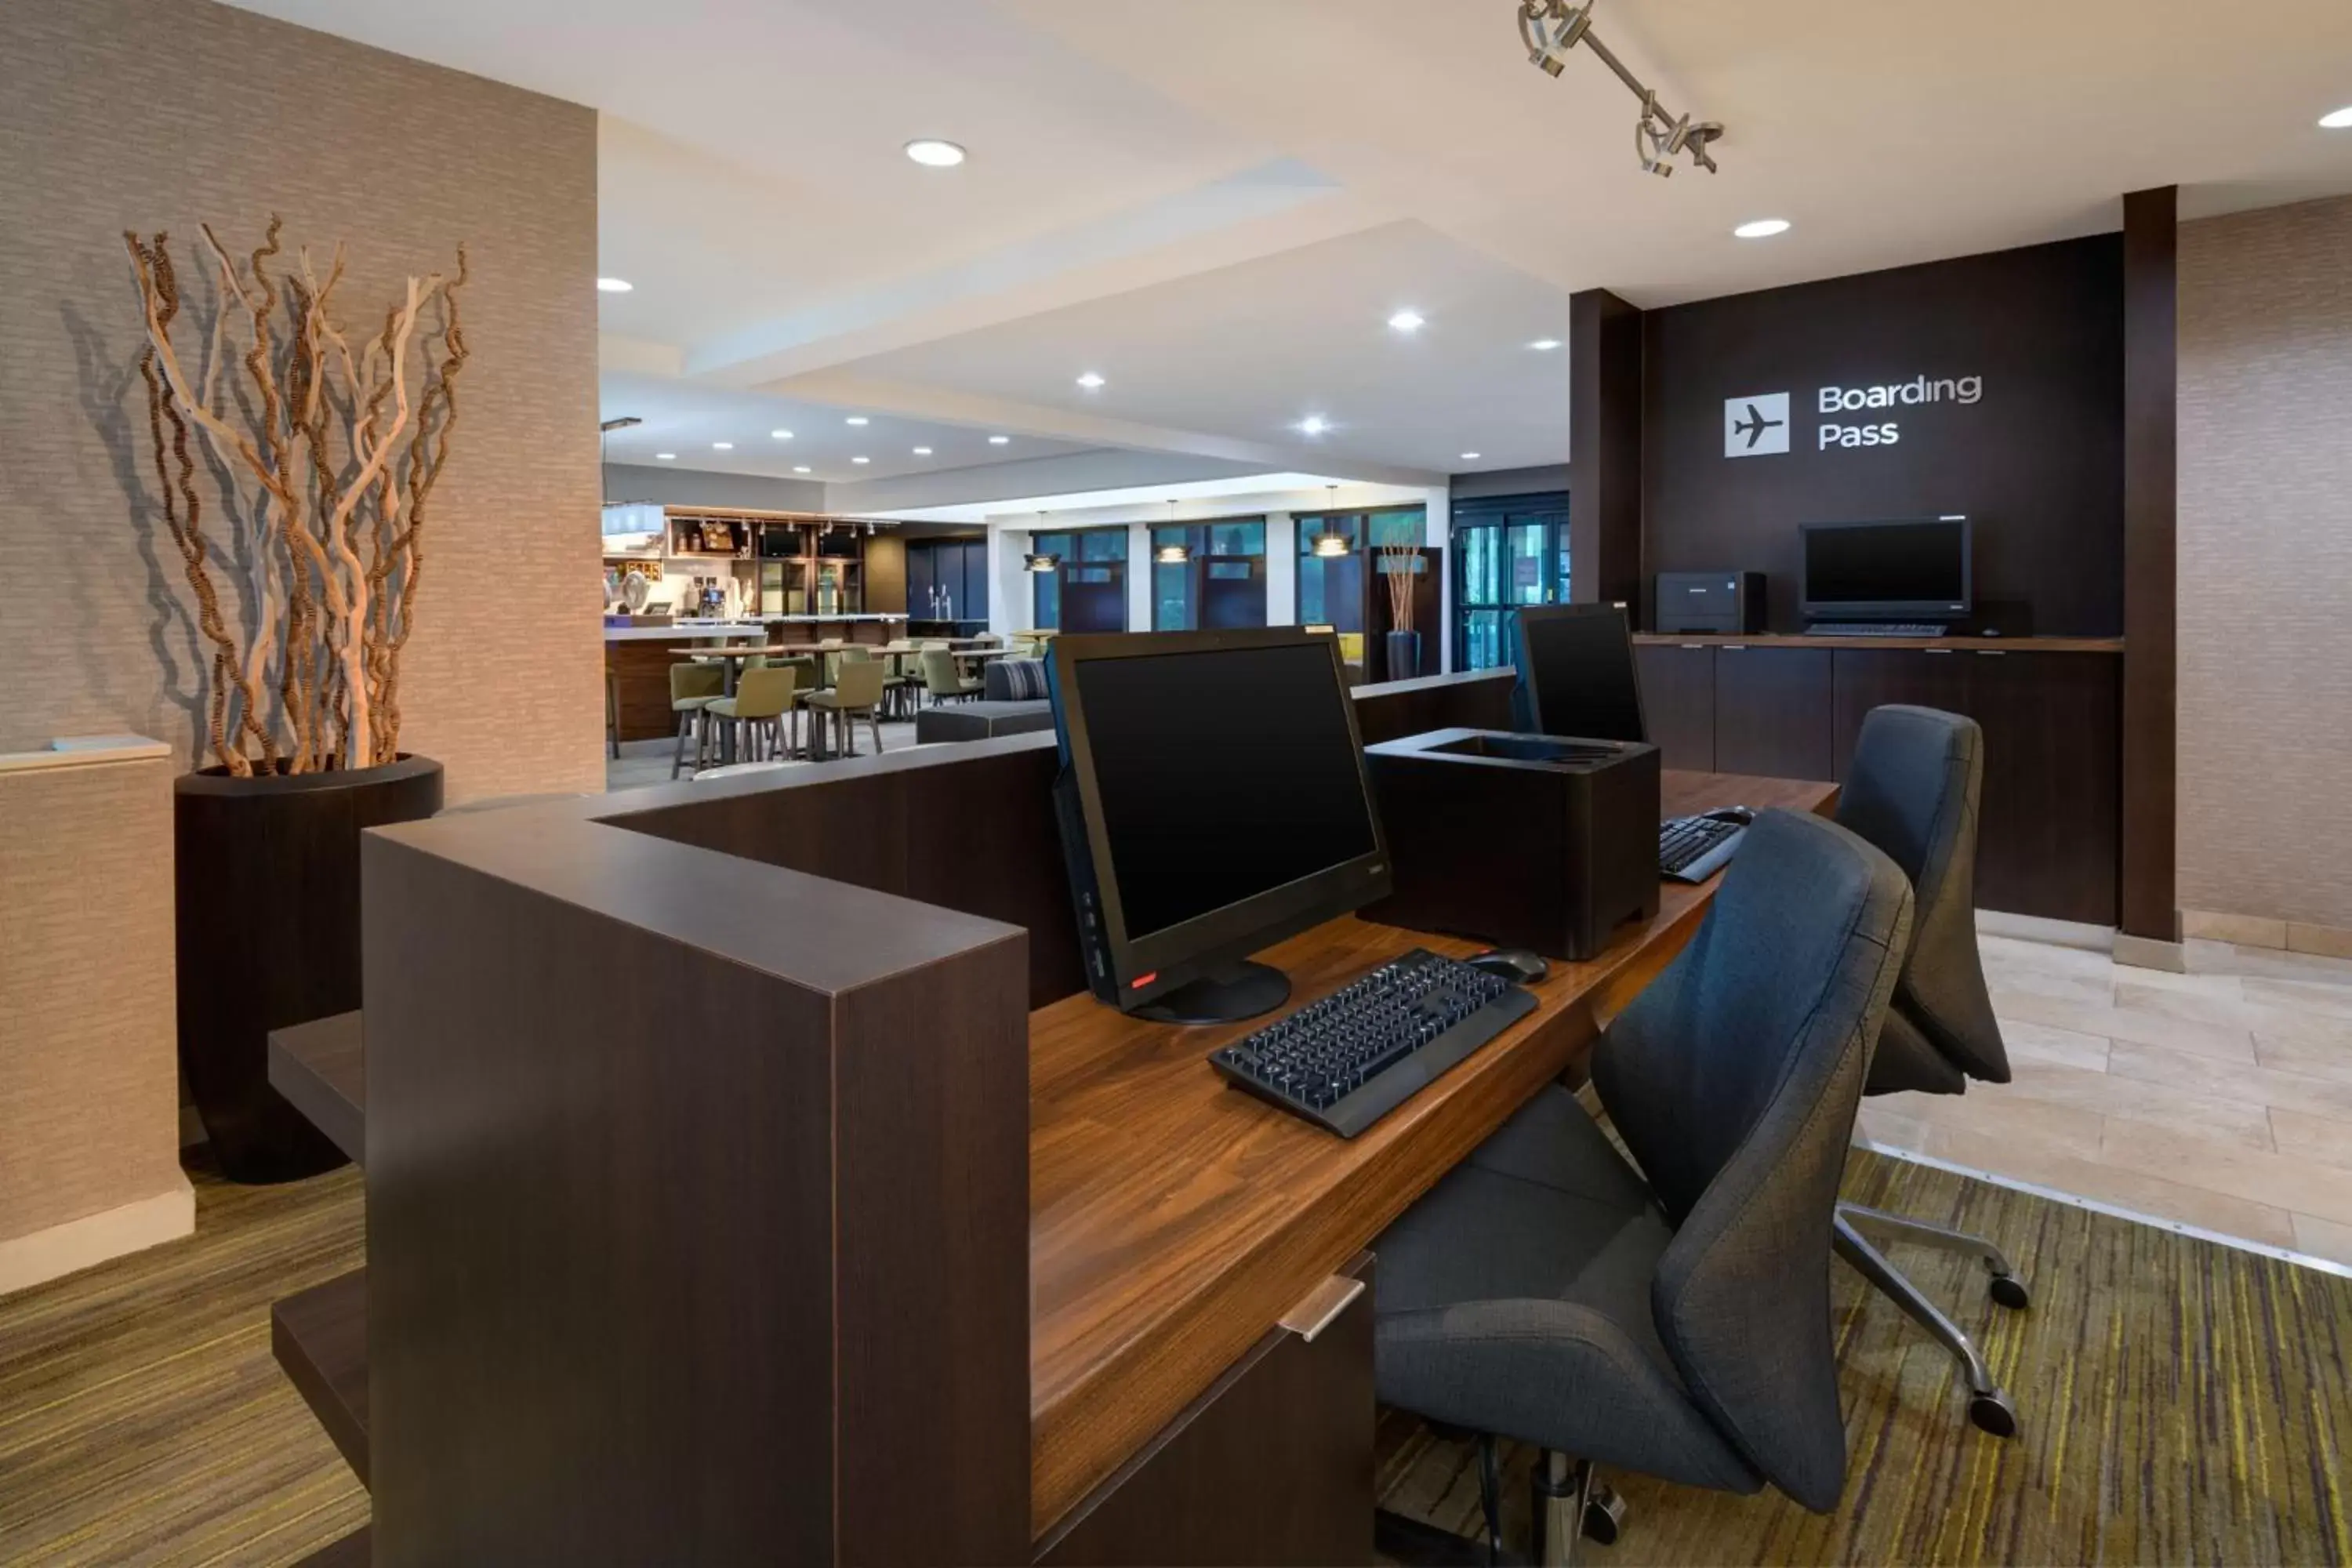 Business facilities in Courtyard by Marriott Perimeter Center